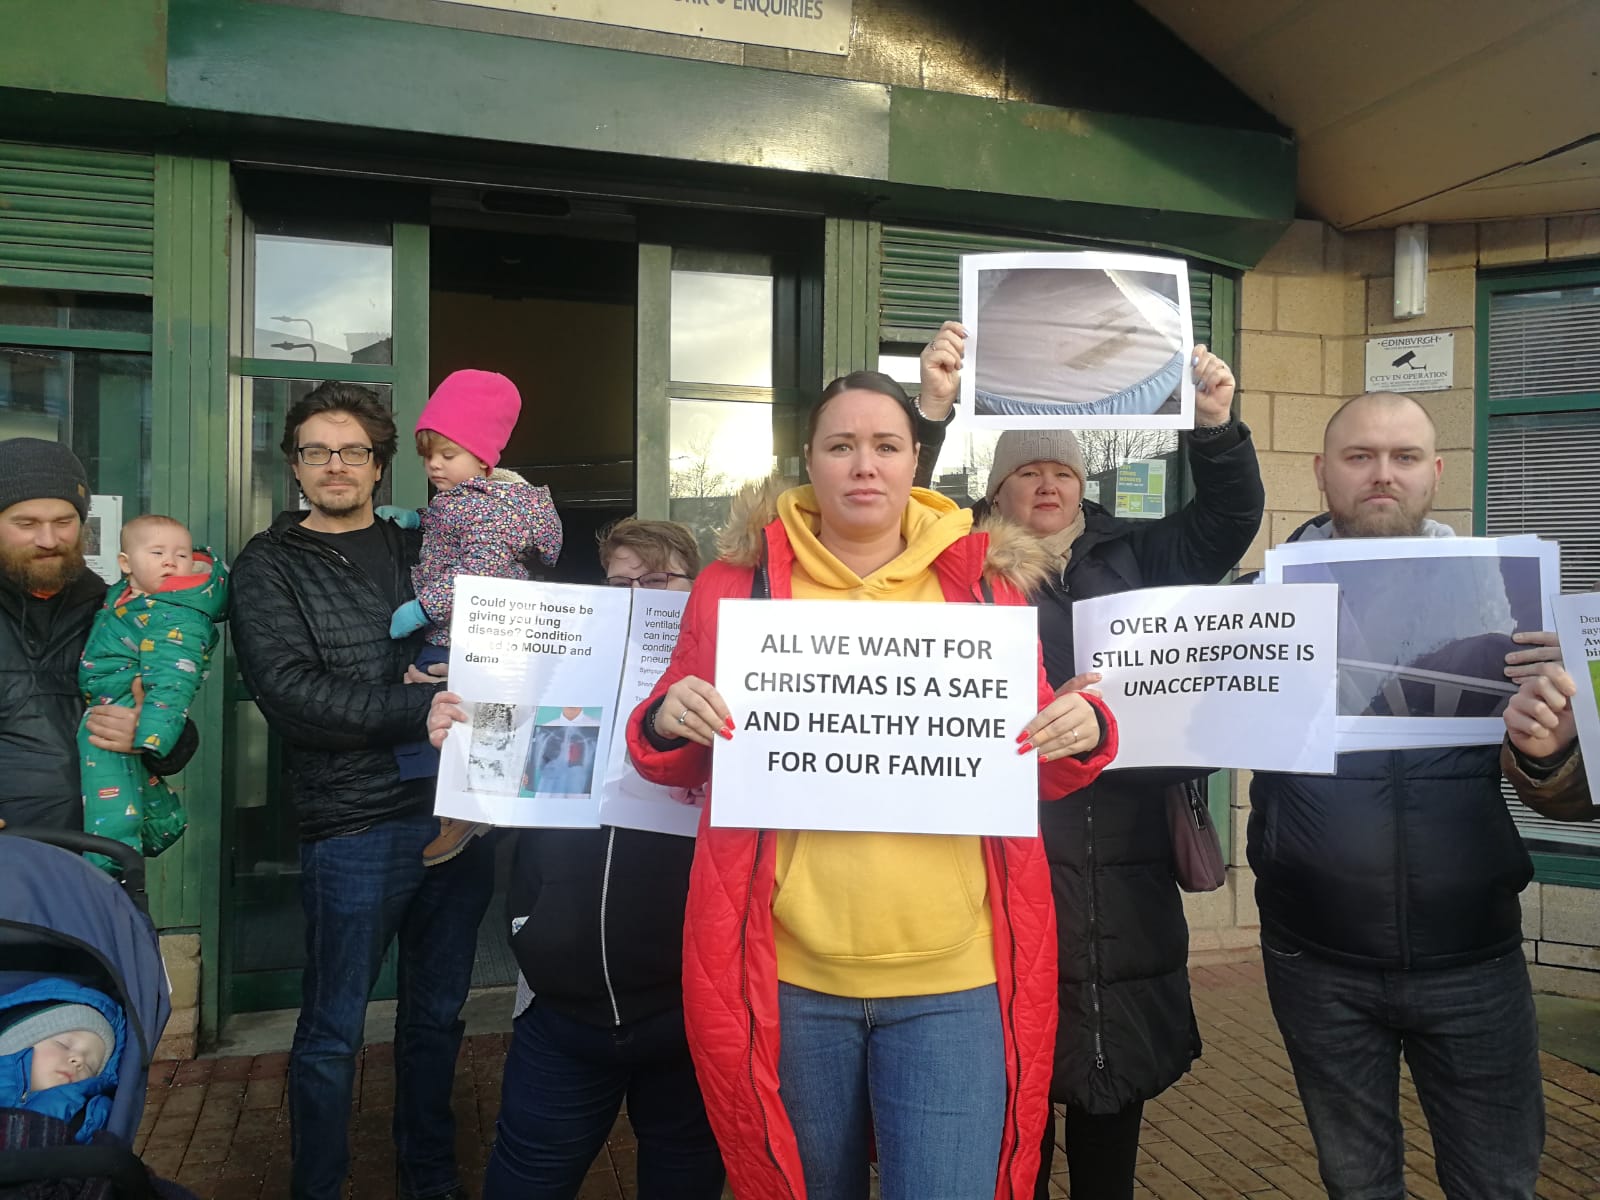 Edinburgh Council tenants stage protest against mould and damp in home